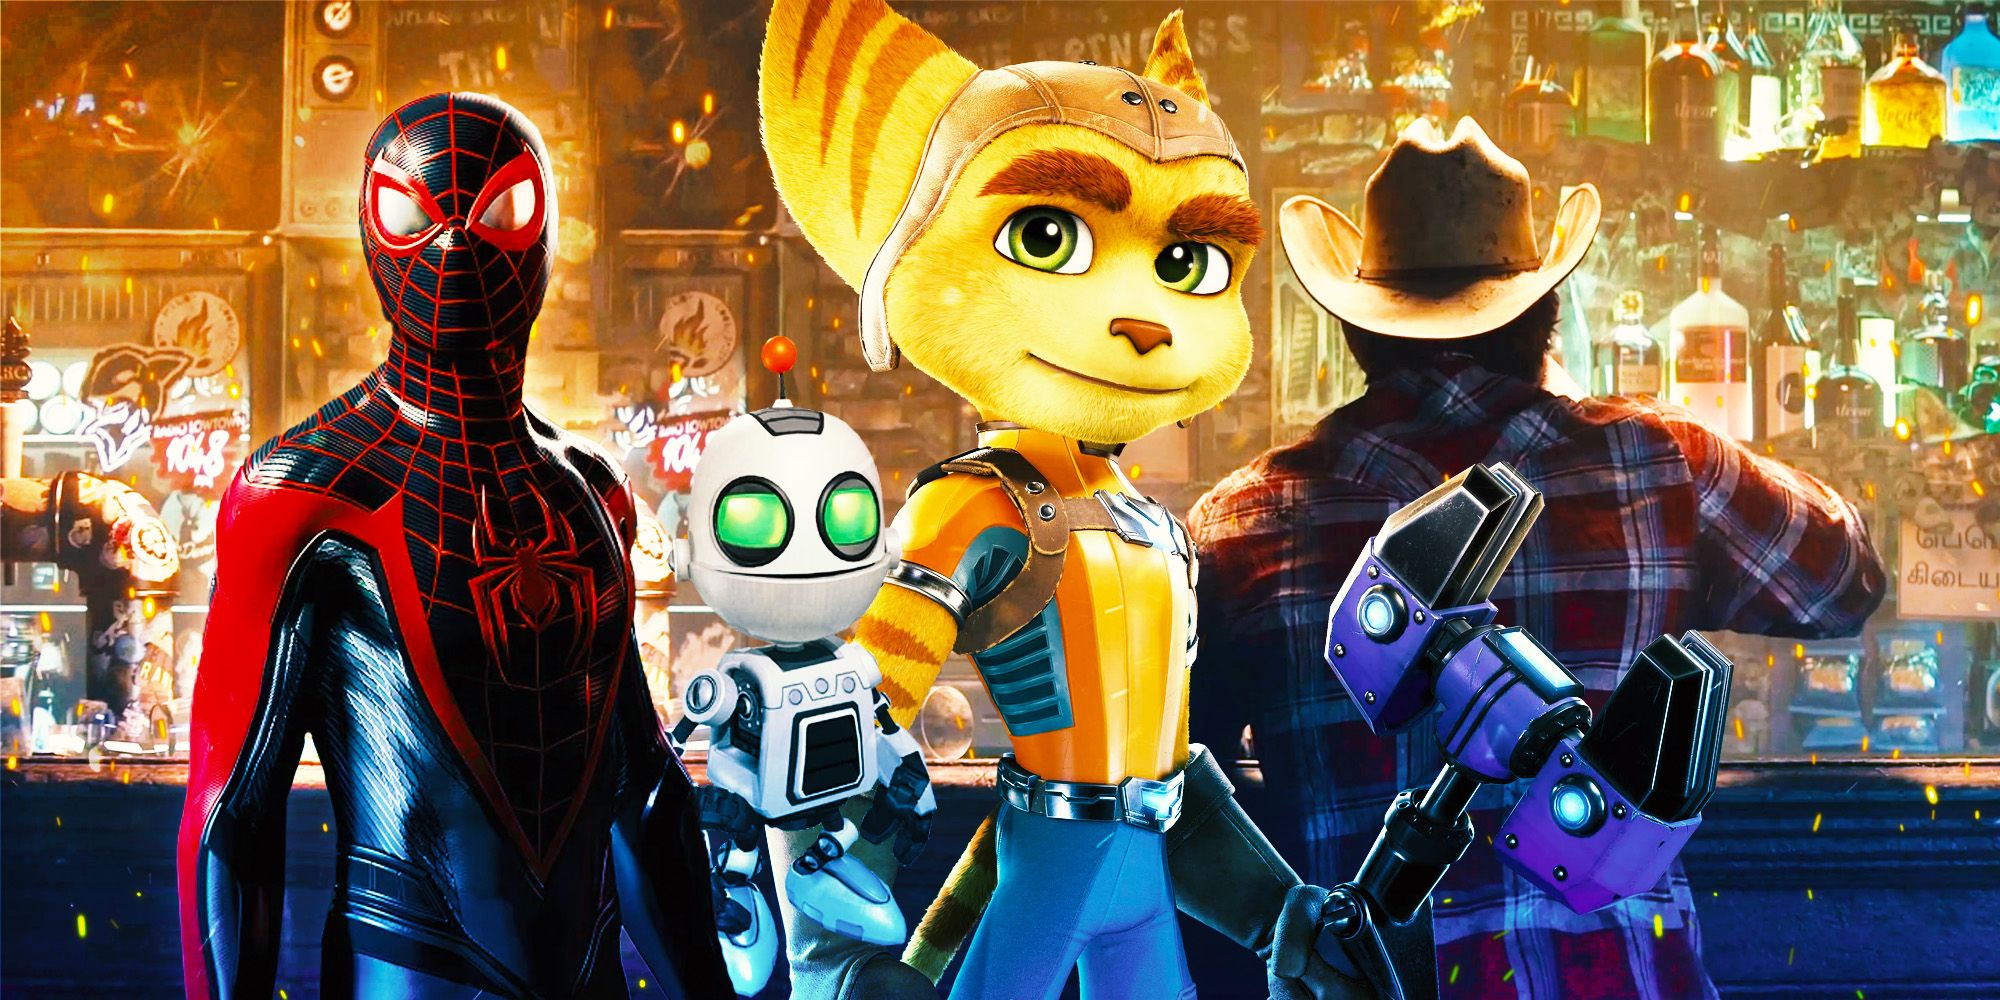 Spider-Man, Ratchet, and Clank in front of Wolverine's Logan drinking at a bar.